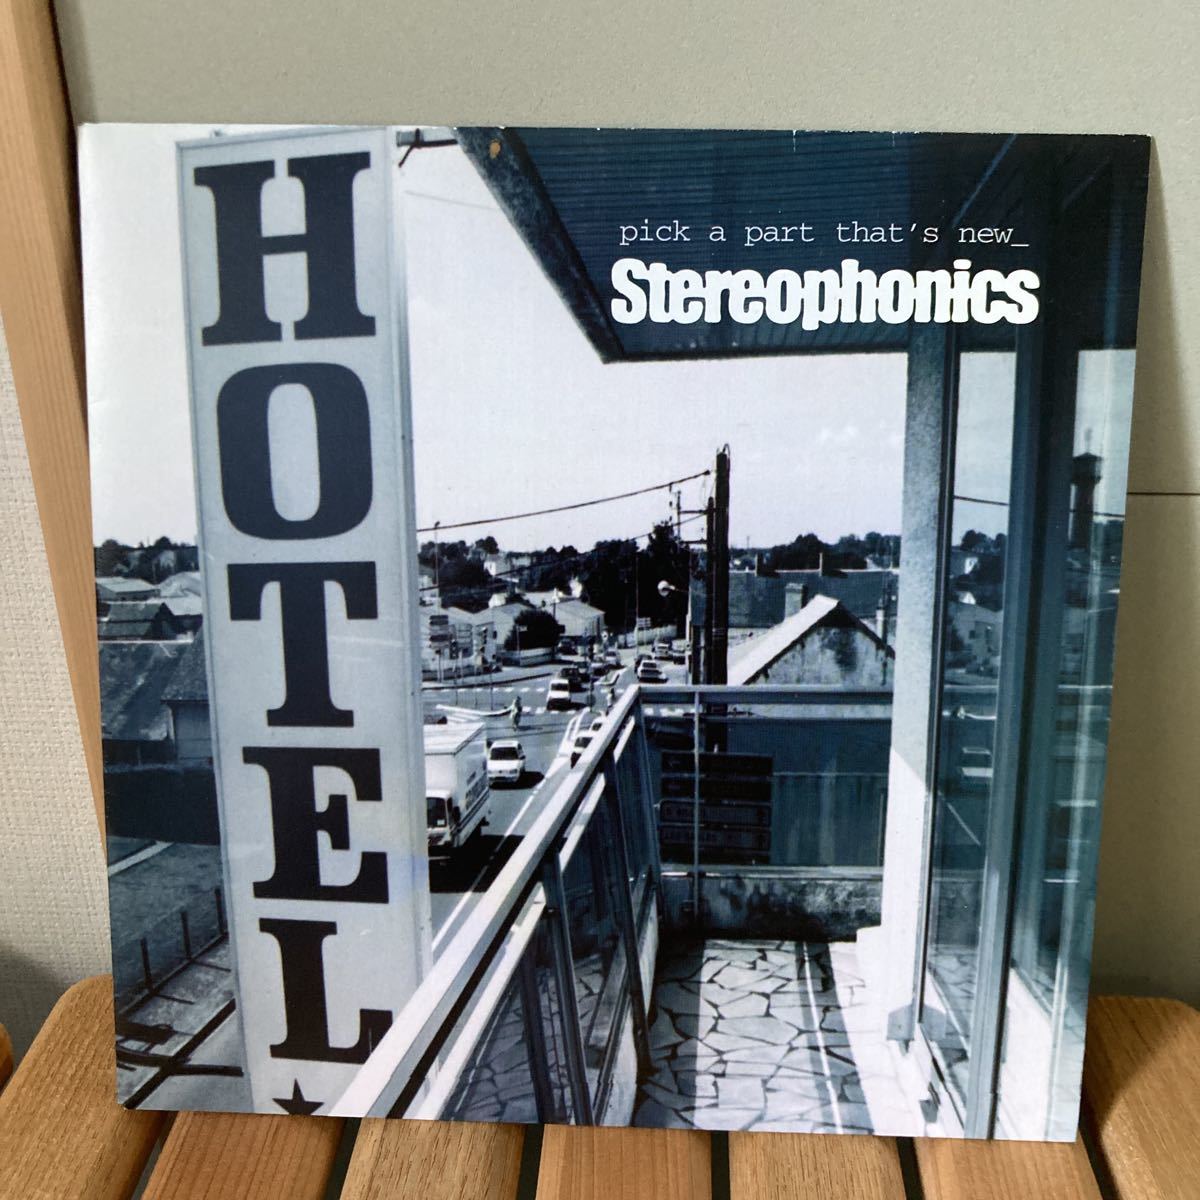 stereophonics、pick a part that's new、7インチ、インディロック、ギターポップ、indie rock_画像1